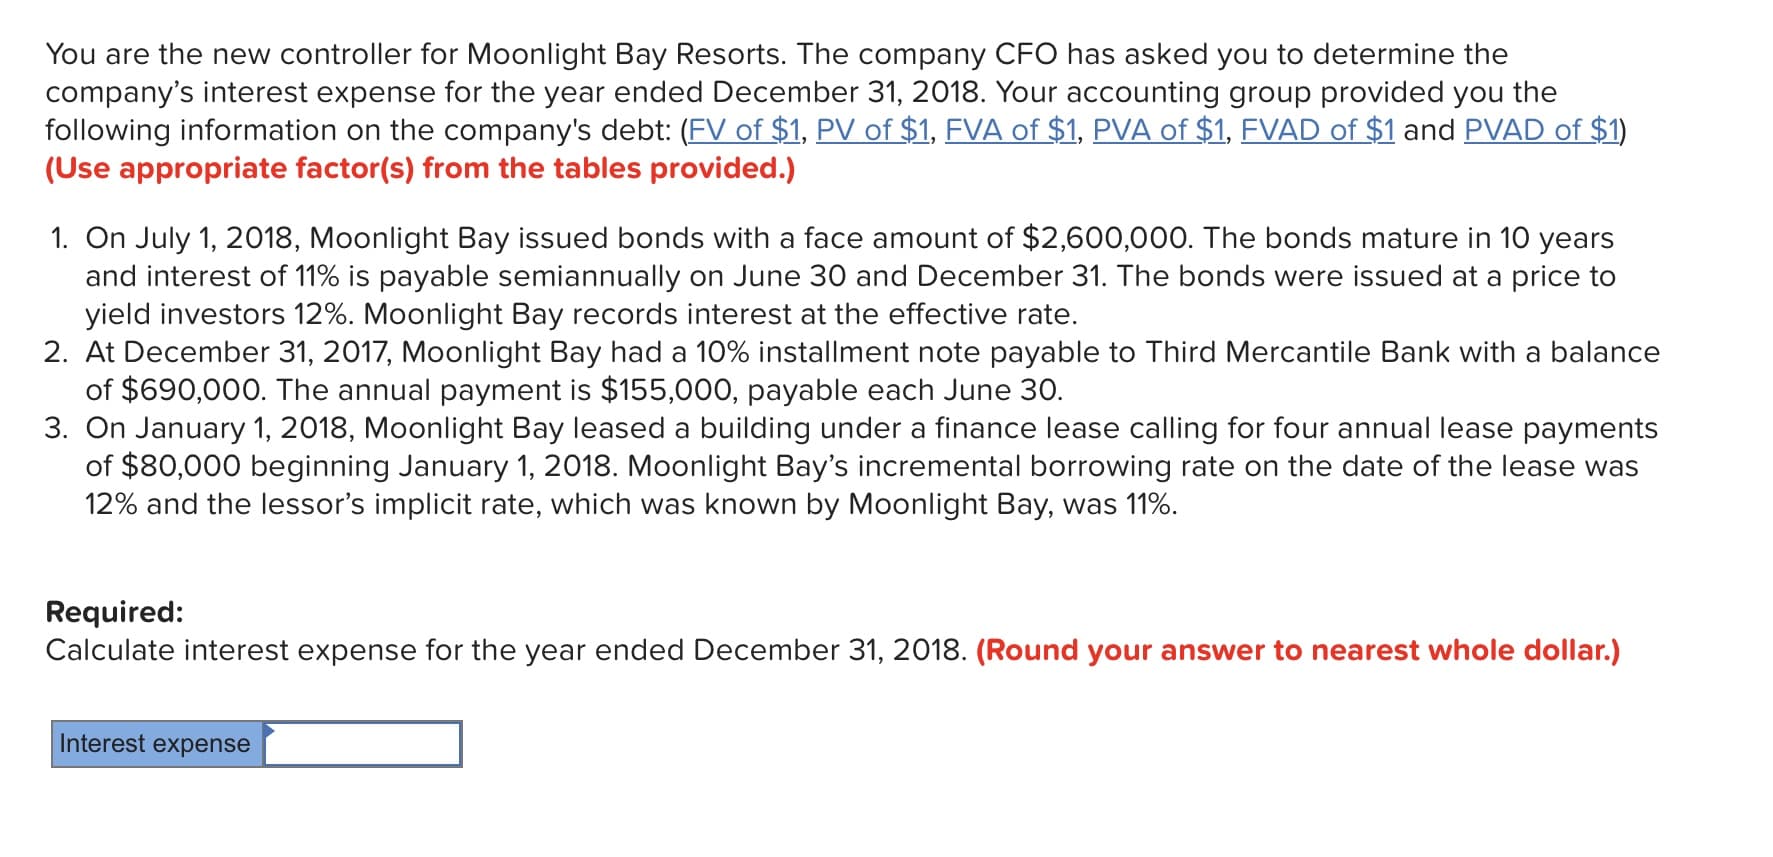 You are the new controller for Moonlight Bay Resorts. The company CFO has asked you to determine the
company's interest expense for the year ended December 31, 2018. Your accounting group provided you the
following information on the company's debt: (FV of $1, PV of $1, FVA of $1, PVA of $1, FVAD of $1 and PVAD of $1)
(Use appropriate factor(s) from the tables provided.)
1. On July 1, 2018, Moonlight Bay issued bonds with a face amount of $2,600,000. The bonds mature in 10 years
and interest of 11% is payable semiannually on June 30 and December 31, The bonds were issued at a price to
yield investors 12%. Moonlight Bay records interest at the effective rate
of $690,000. The annual payment is $155,000, payable each June 30.
of $80,000 beginning January 1, 2018. Moonlight Bay's incremental borrowing rate on the date of the lease was
2. At December 31, 2017, Moonlight Bay had a 10% installment note payable to Third Mercantile Bank with a balance
3. On January 1, 2018 Moonlight Bay leased a building under a finance lease calling for four annual lease payments
12% and the lessor's implicit rate, which was known by Moonlight Bay, was 11%.
Required:
Calculate interest expense for the year ended December 31, 2018. (Round your answer to nearest whole dollar.)
Interest expense
